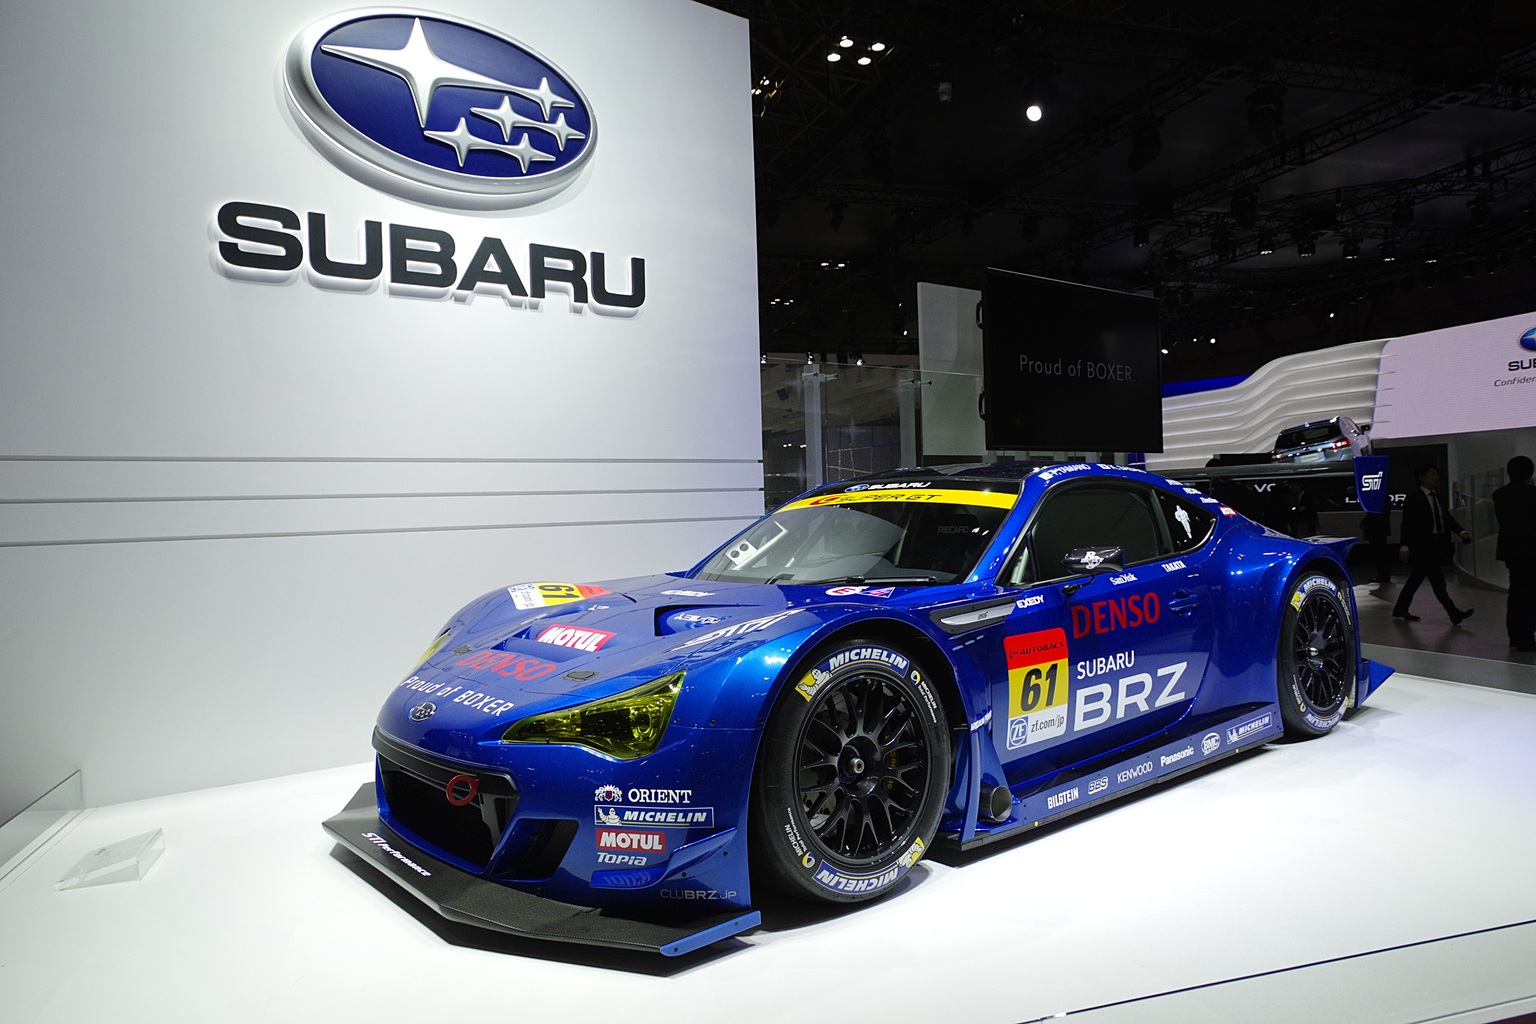 The 43rd Tokyo Motor Show 2013